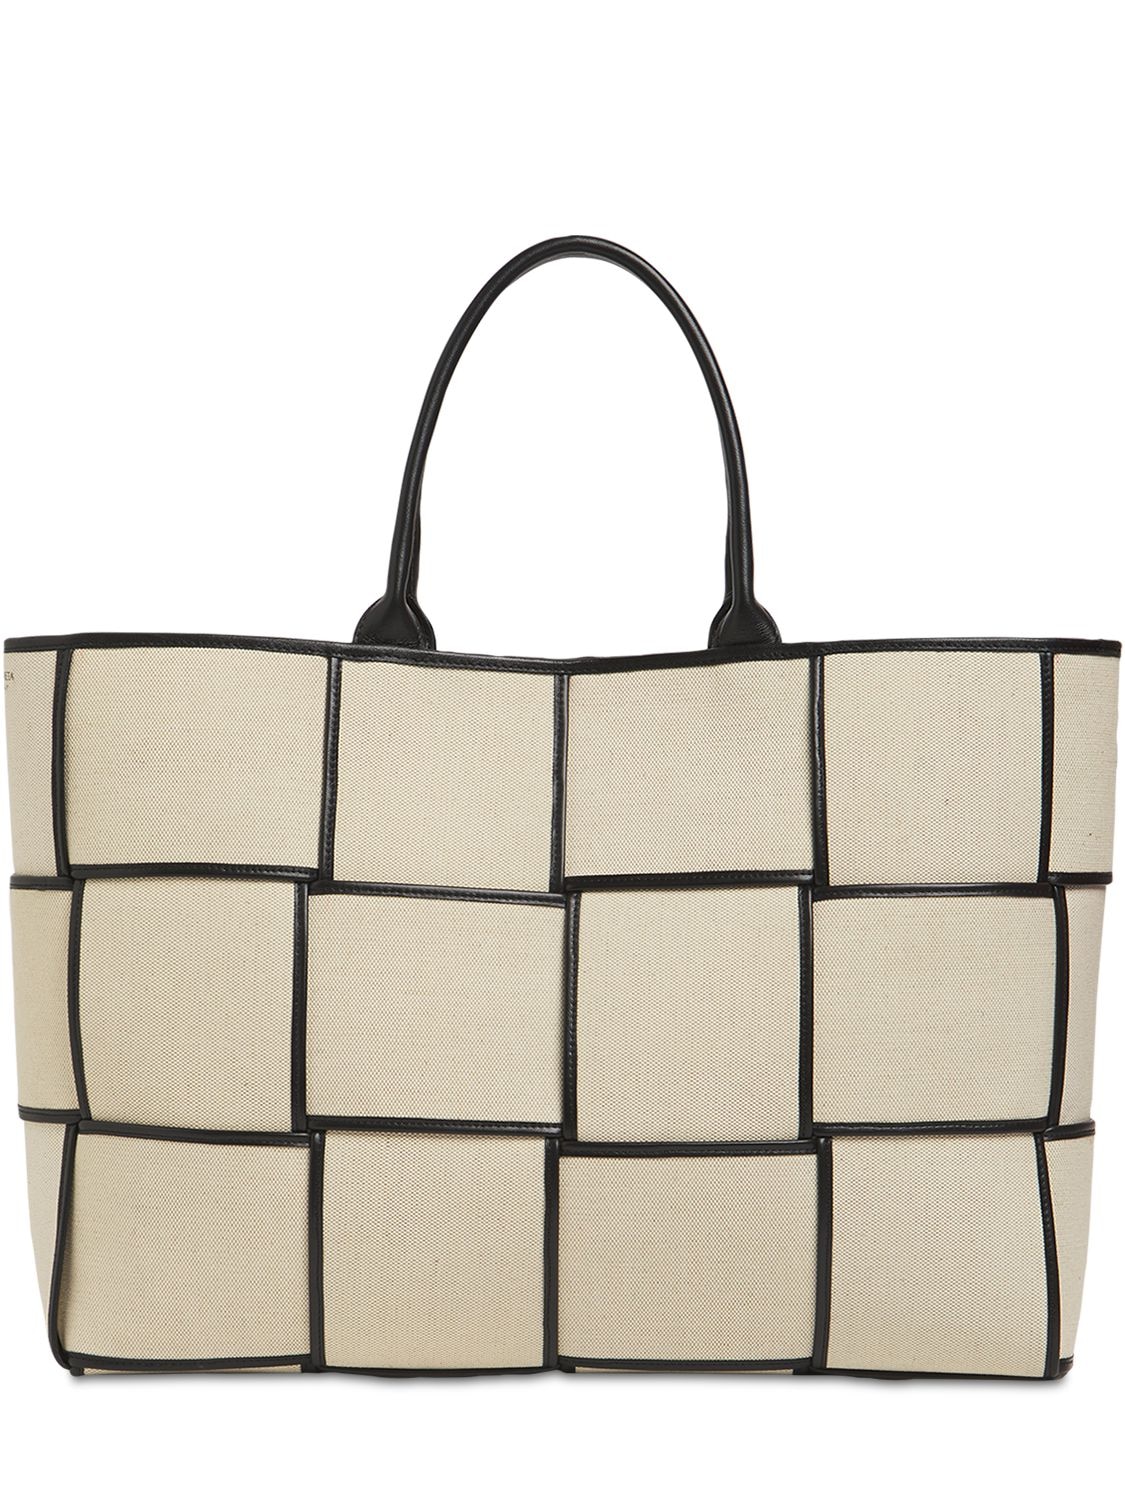 Image of Arco Linen Canvas Tote Bag